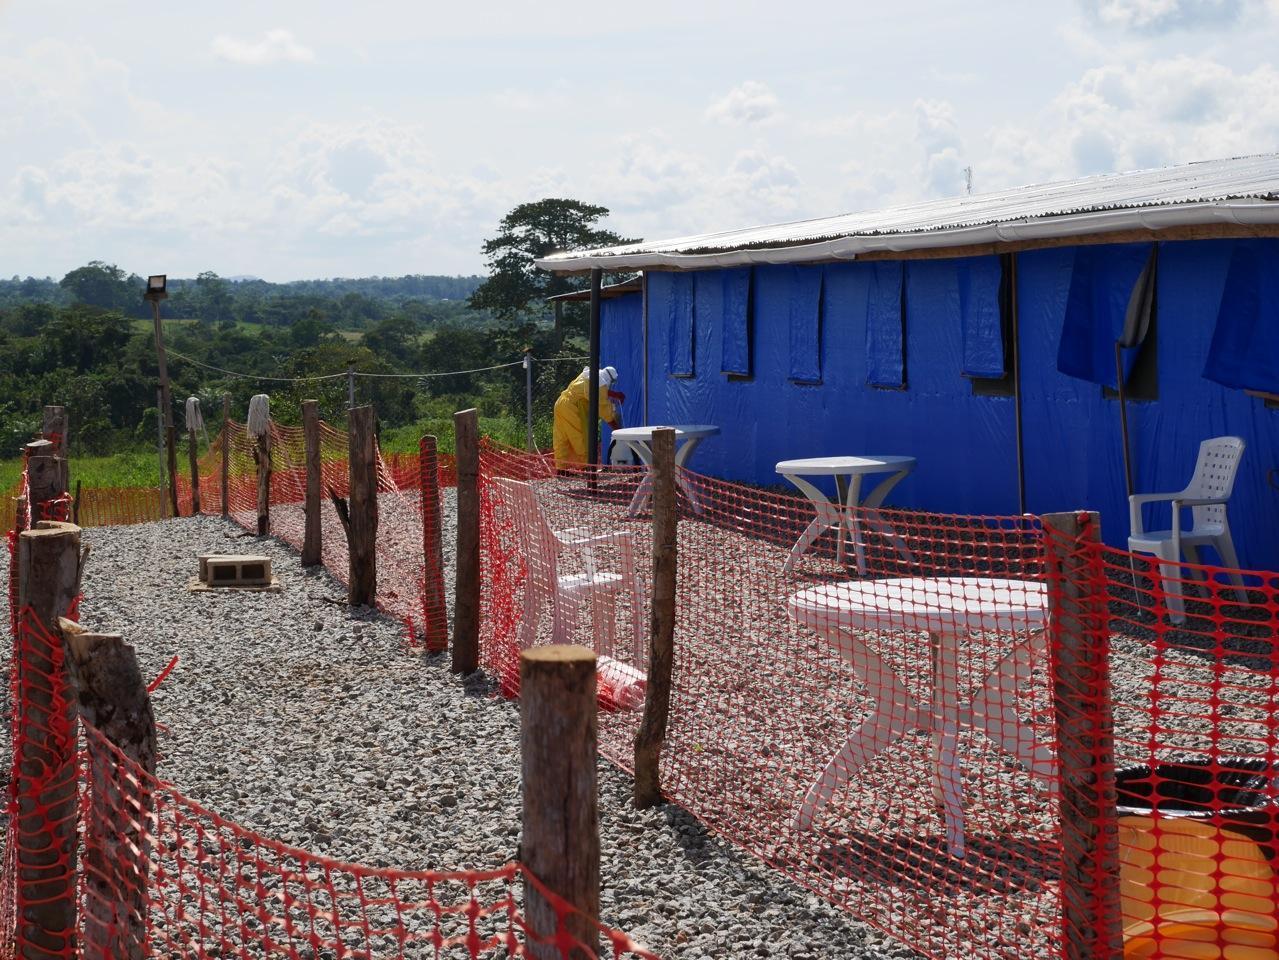 An Ebola treatment unit in Bong County, Liberia, where Welch trains. (Courtesy of John Welch)